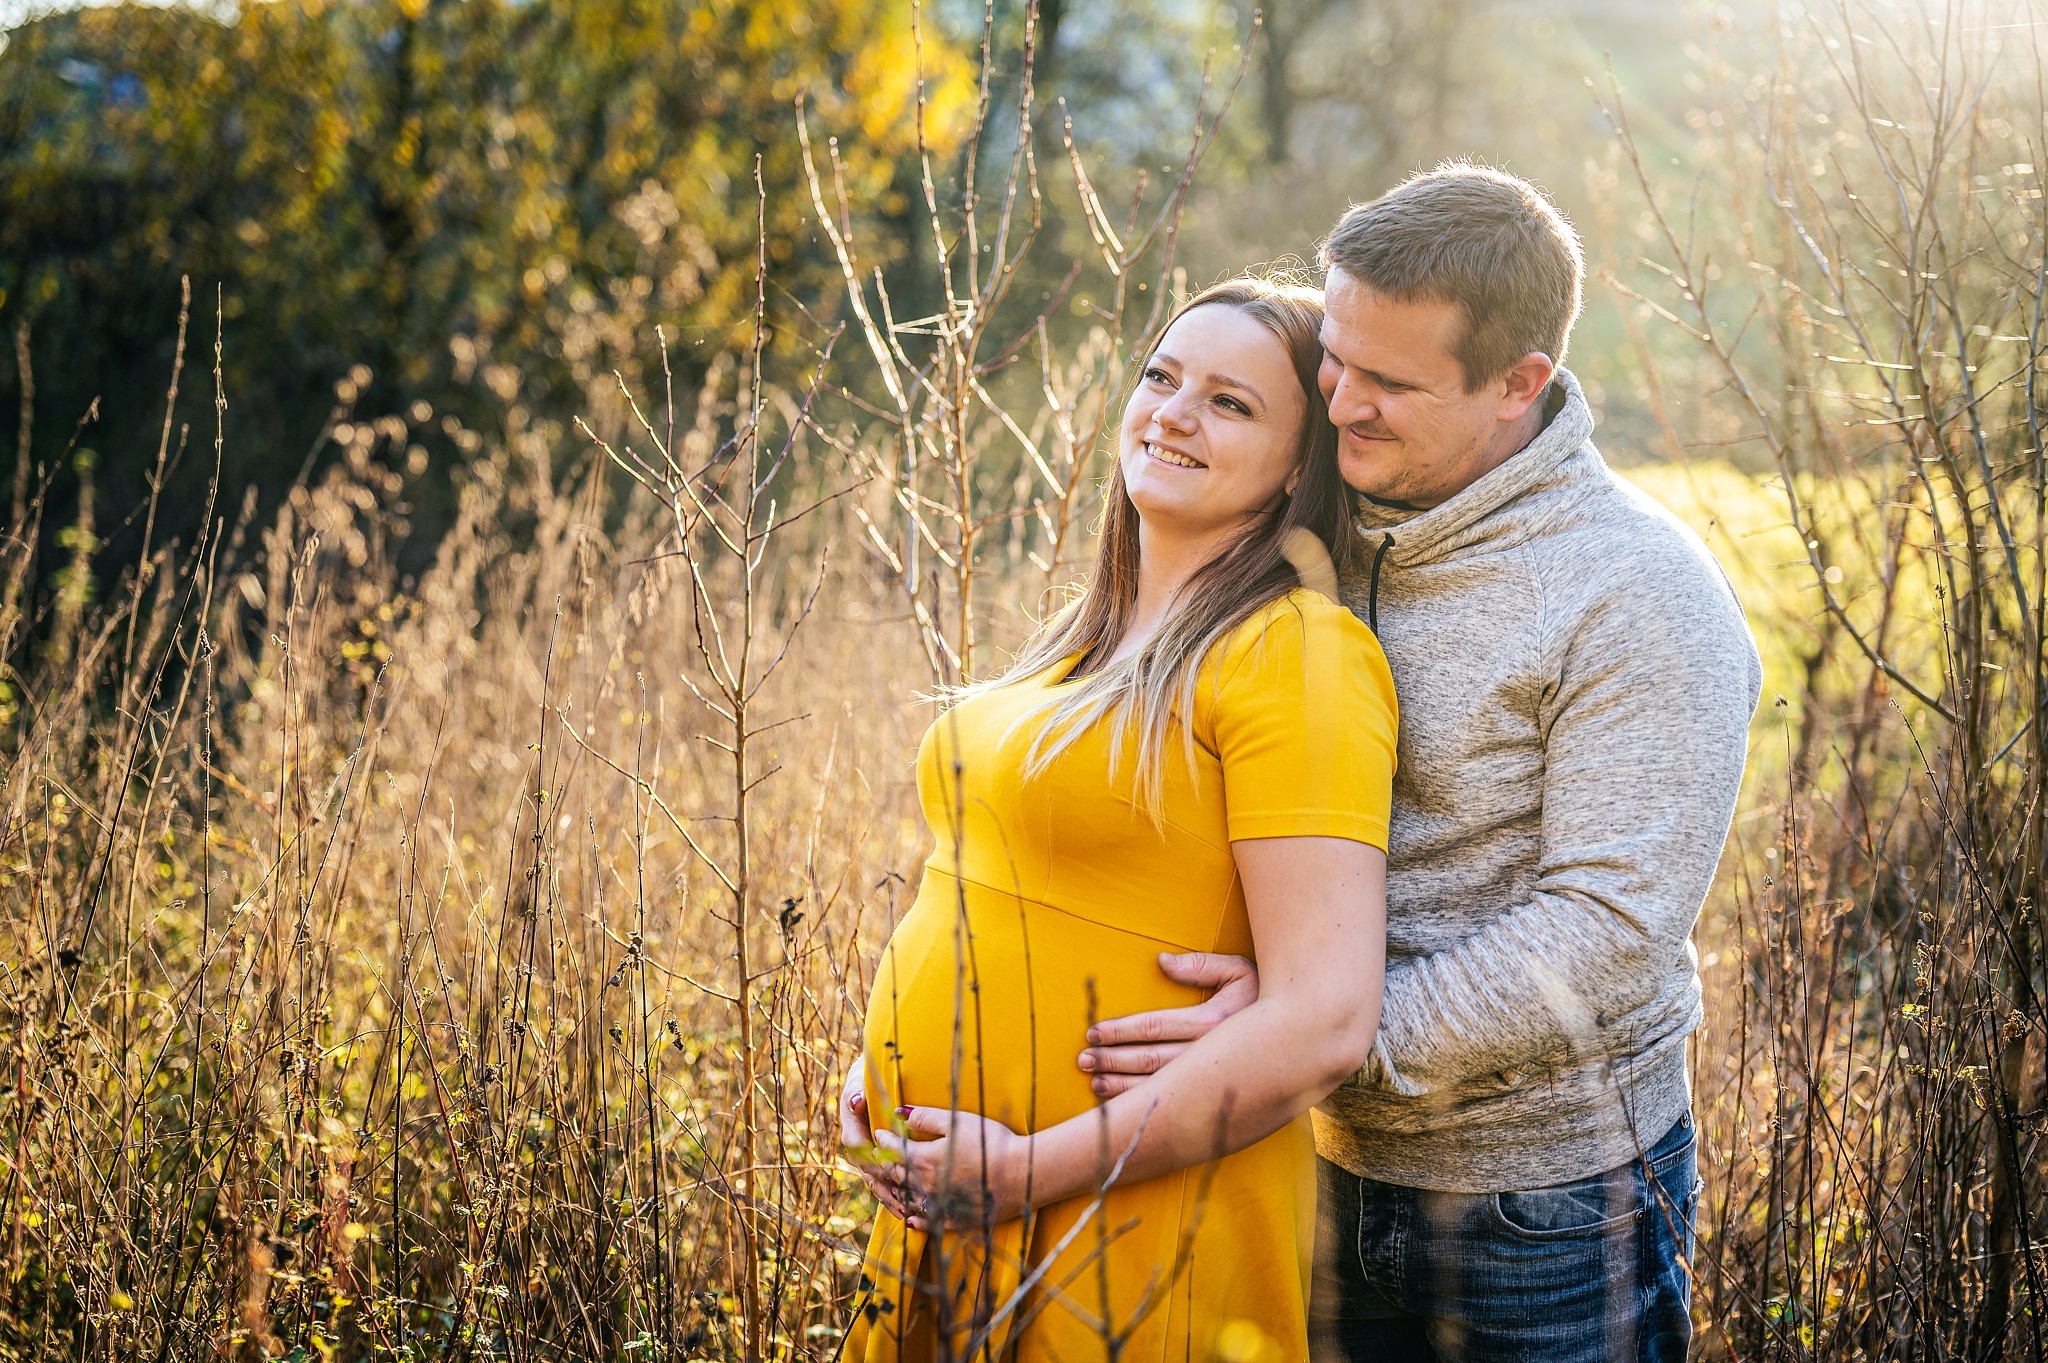 How to Do a Maternity Photoshoot - Plan, Choose the Right Poses, and Get the Whole Family Involved 